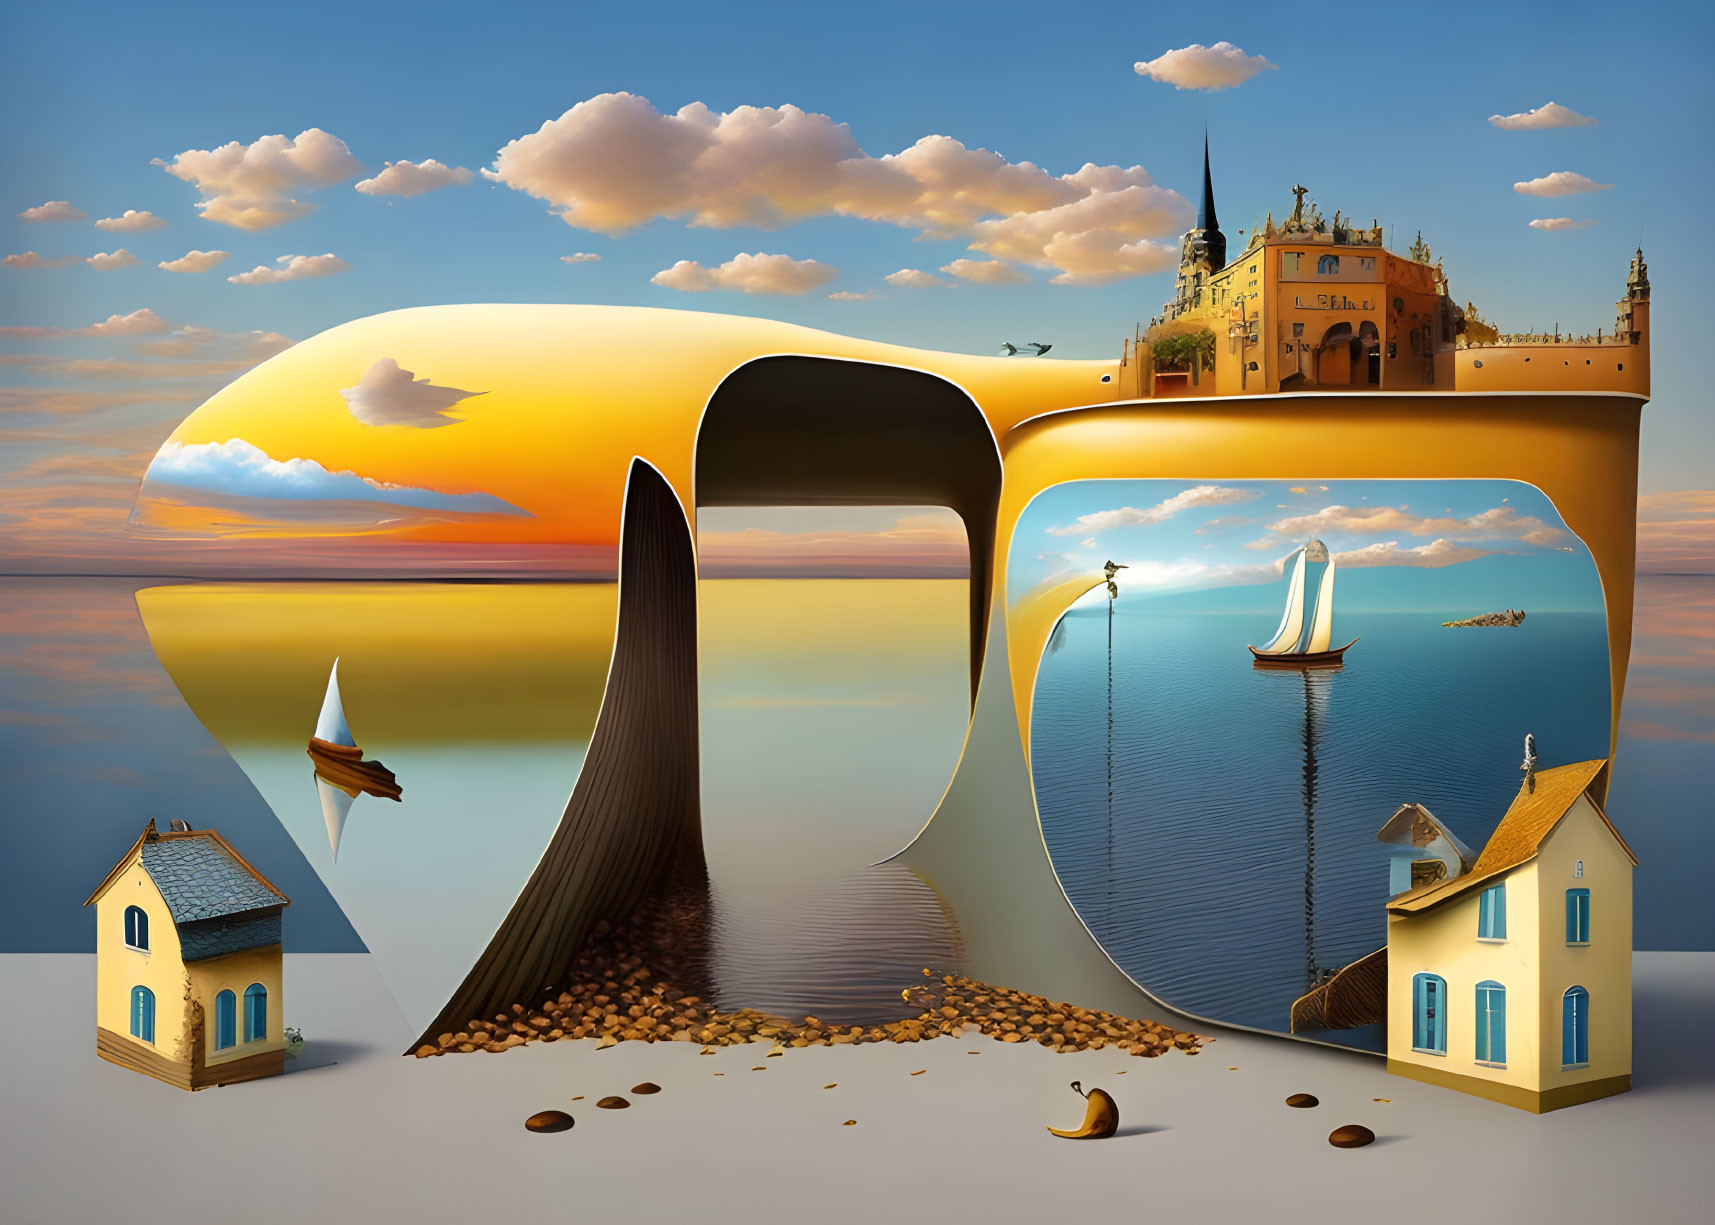 Surreal landscape with oversized letter "R" and castle, boats, house, seascape,